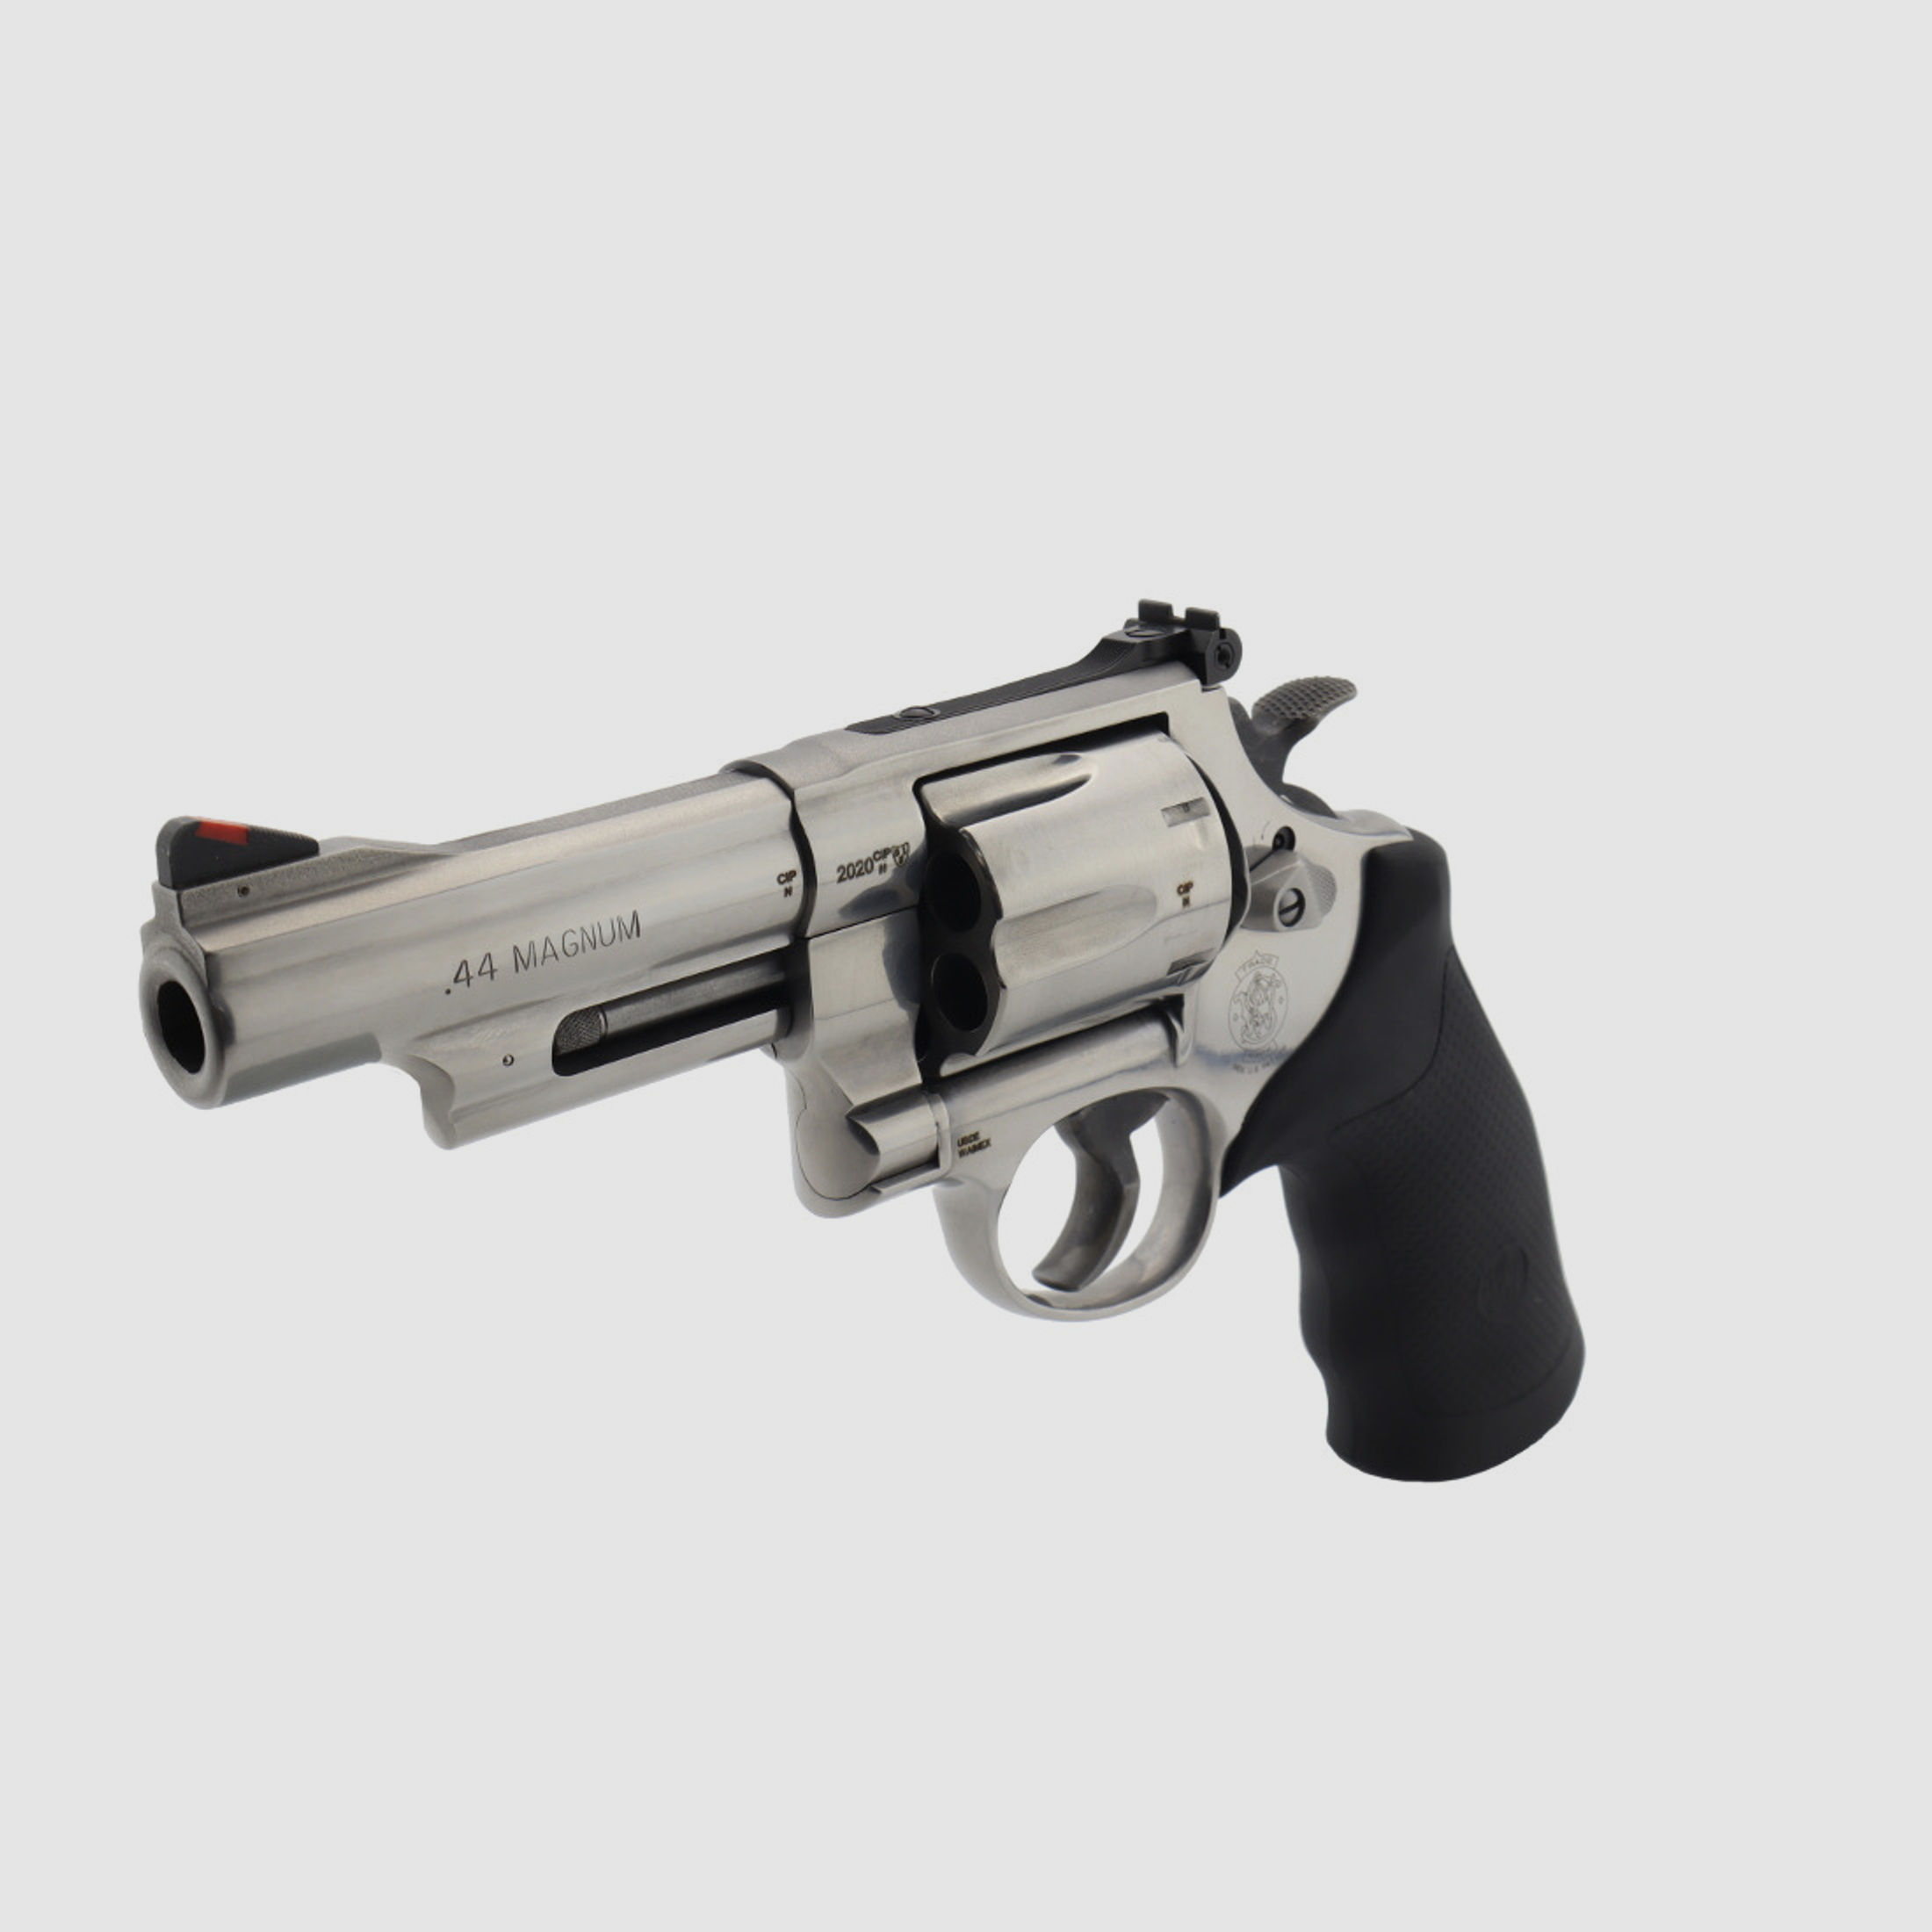 Smith & Wesson 629  4"